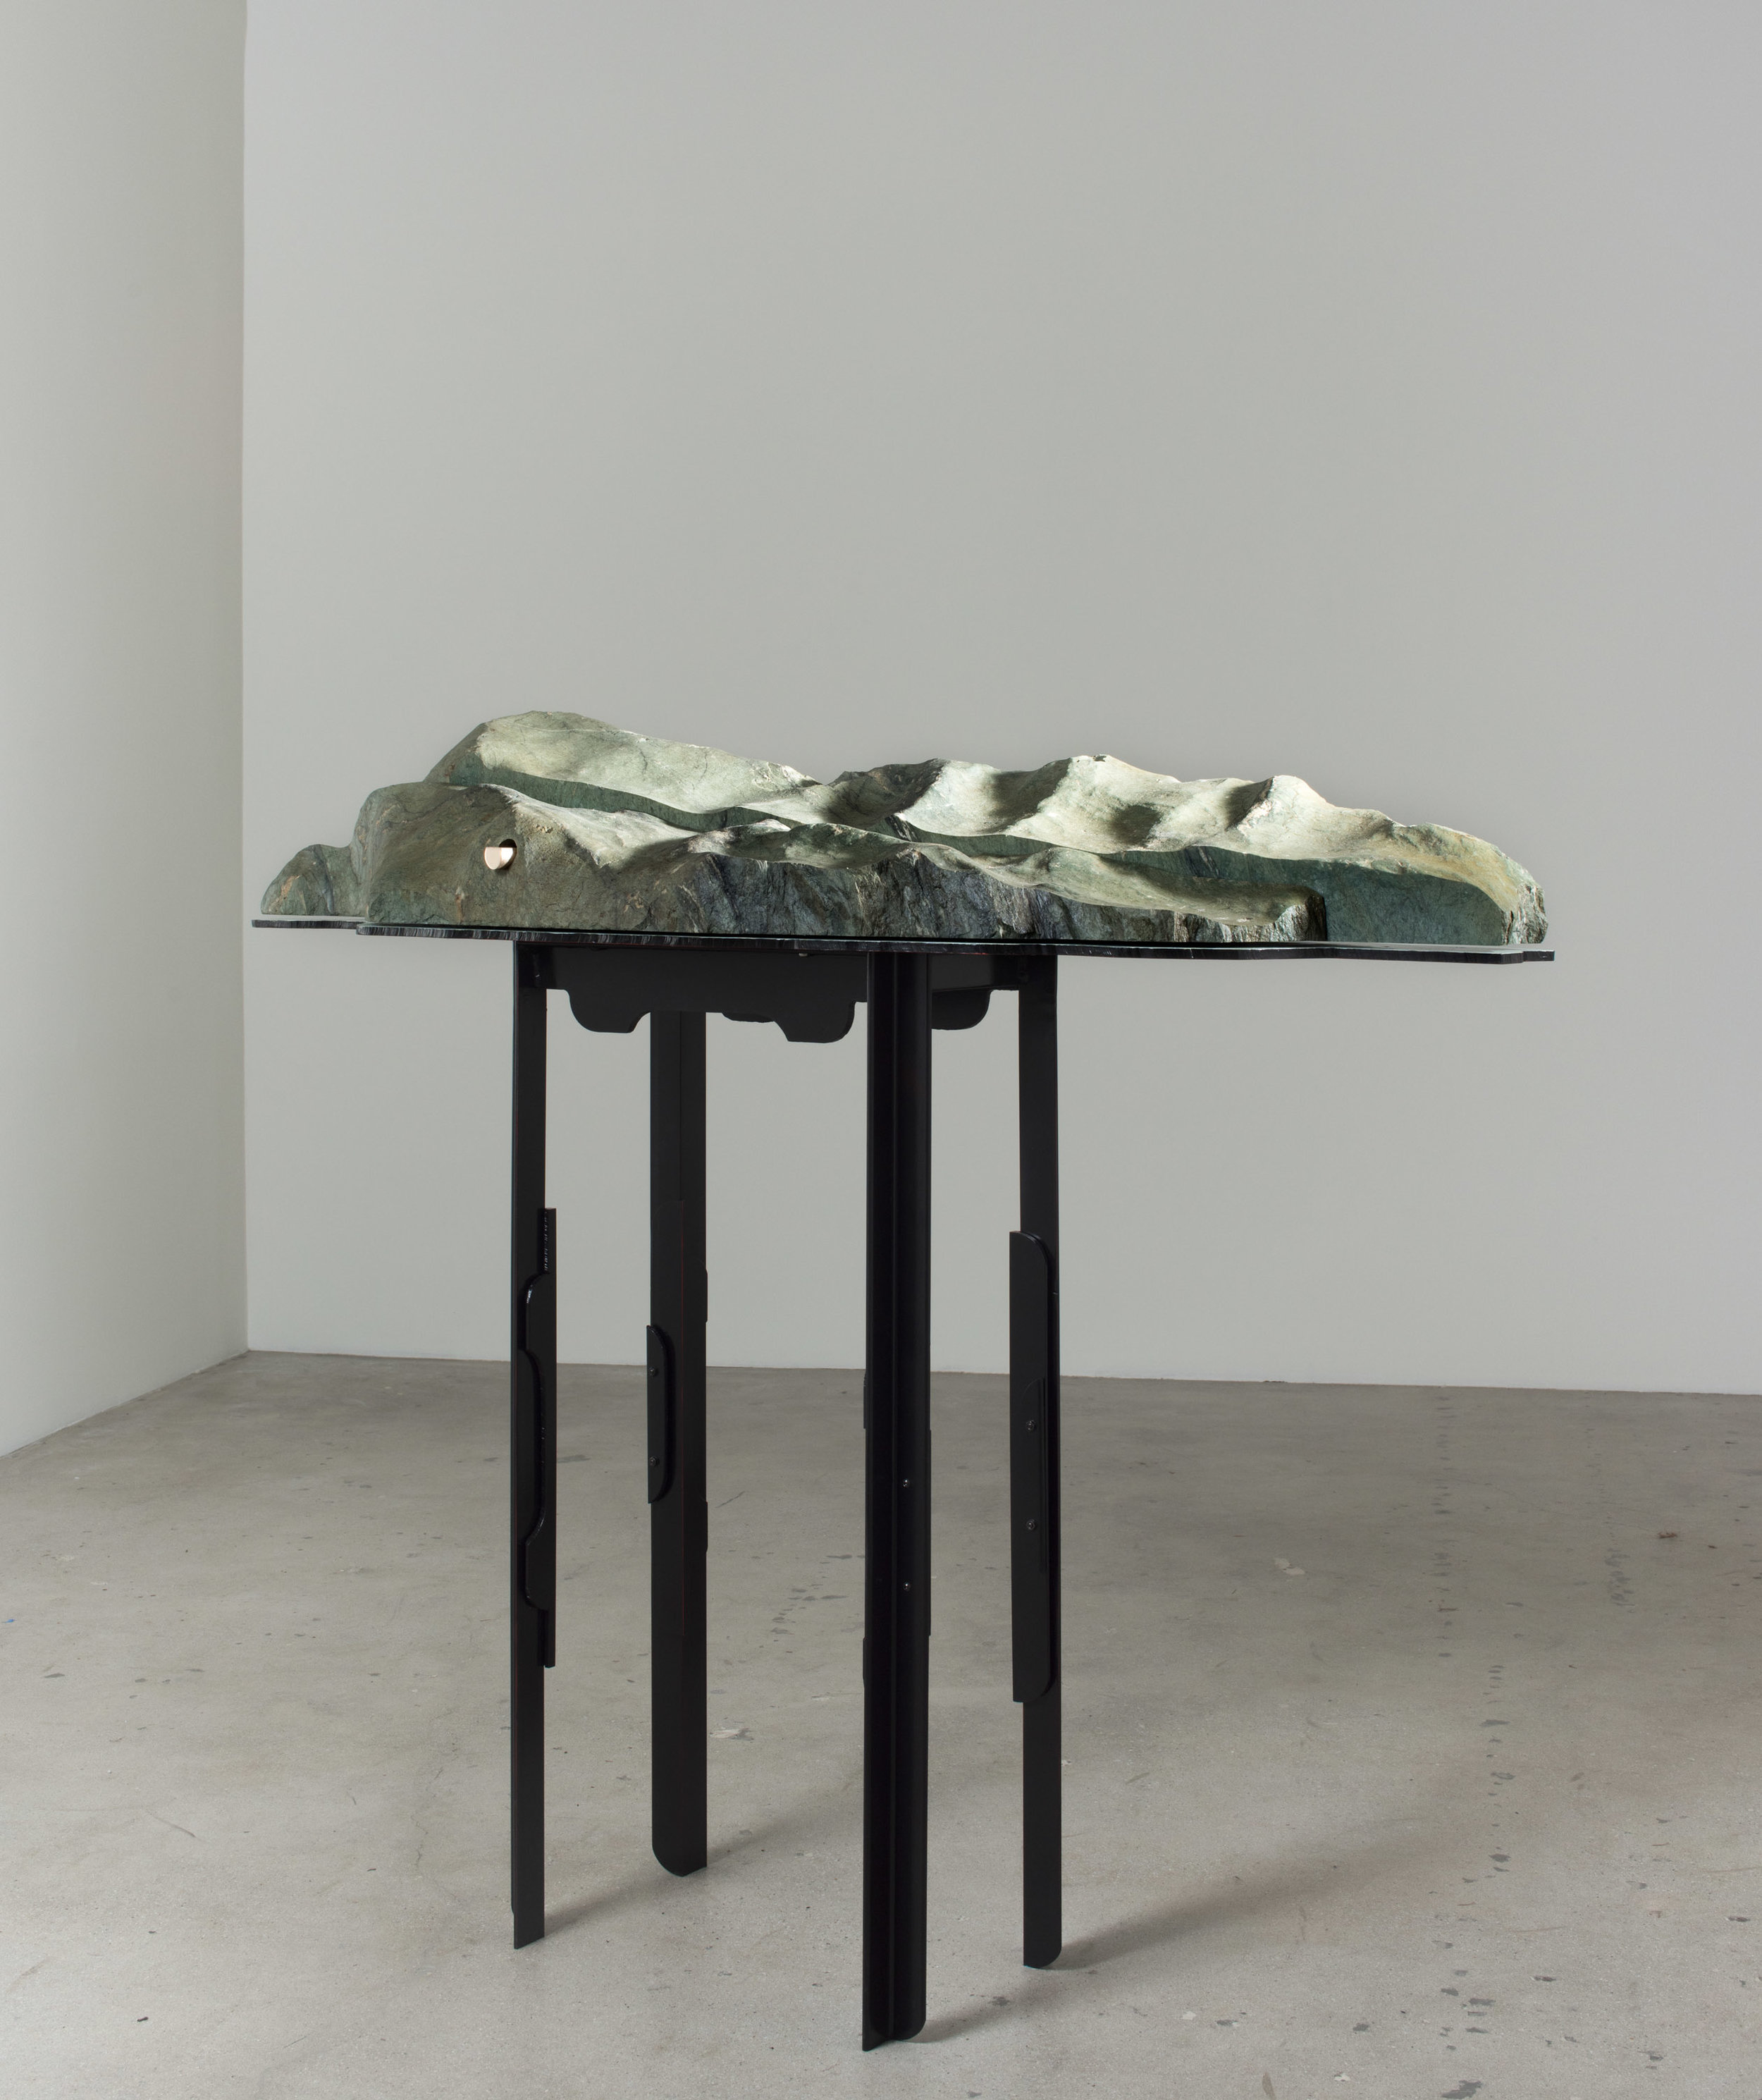   II Model of an Earth Fastener on the San Andreasm Fault , 2019 Steel, enamel, greenschist, and bronze 52 x 64 x 16 inches 